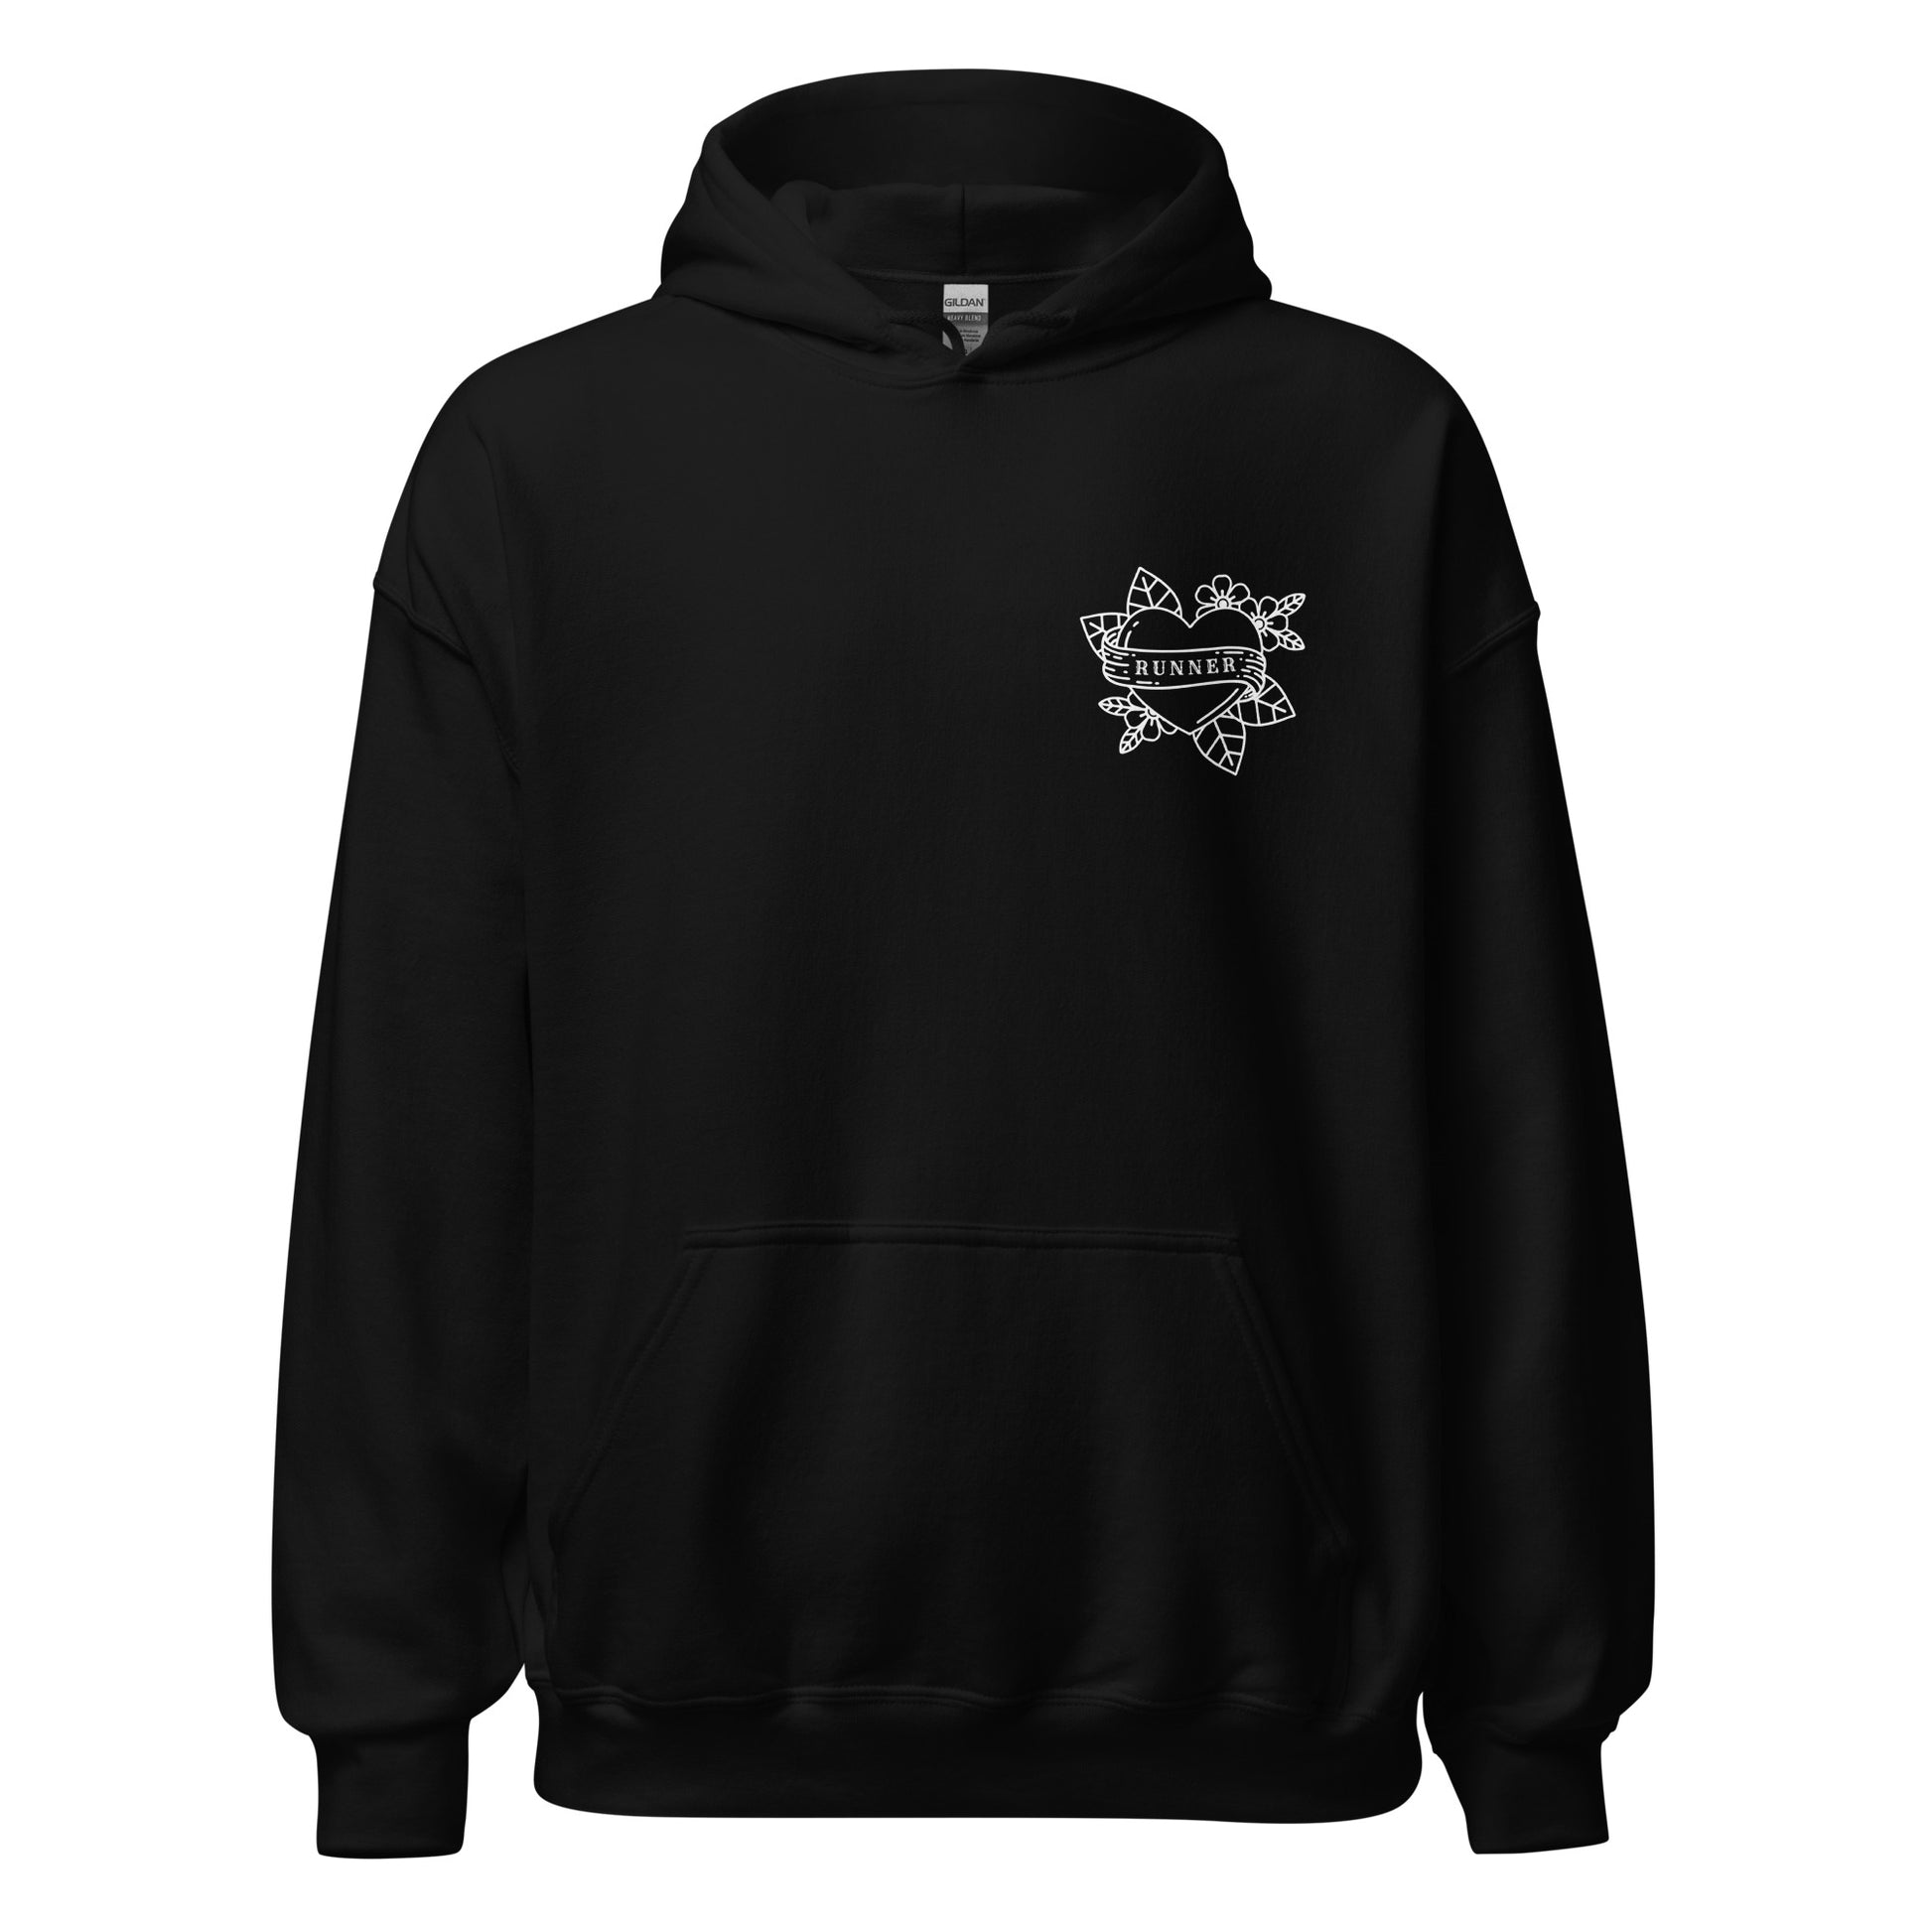 black hoodie with a white tattoo style heart across the front, with the word 'runner' in a scroll across it